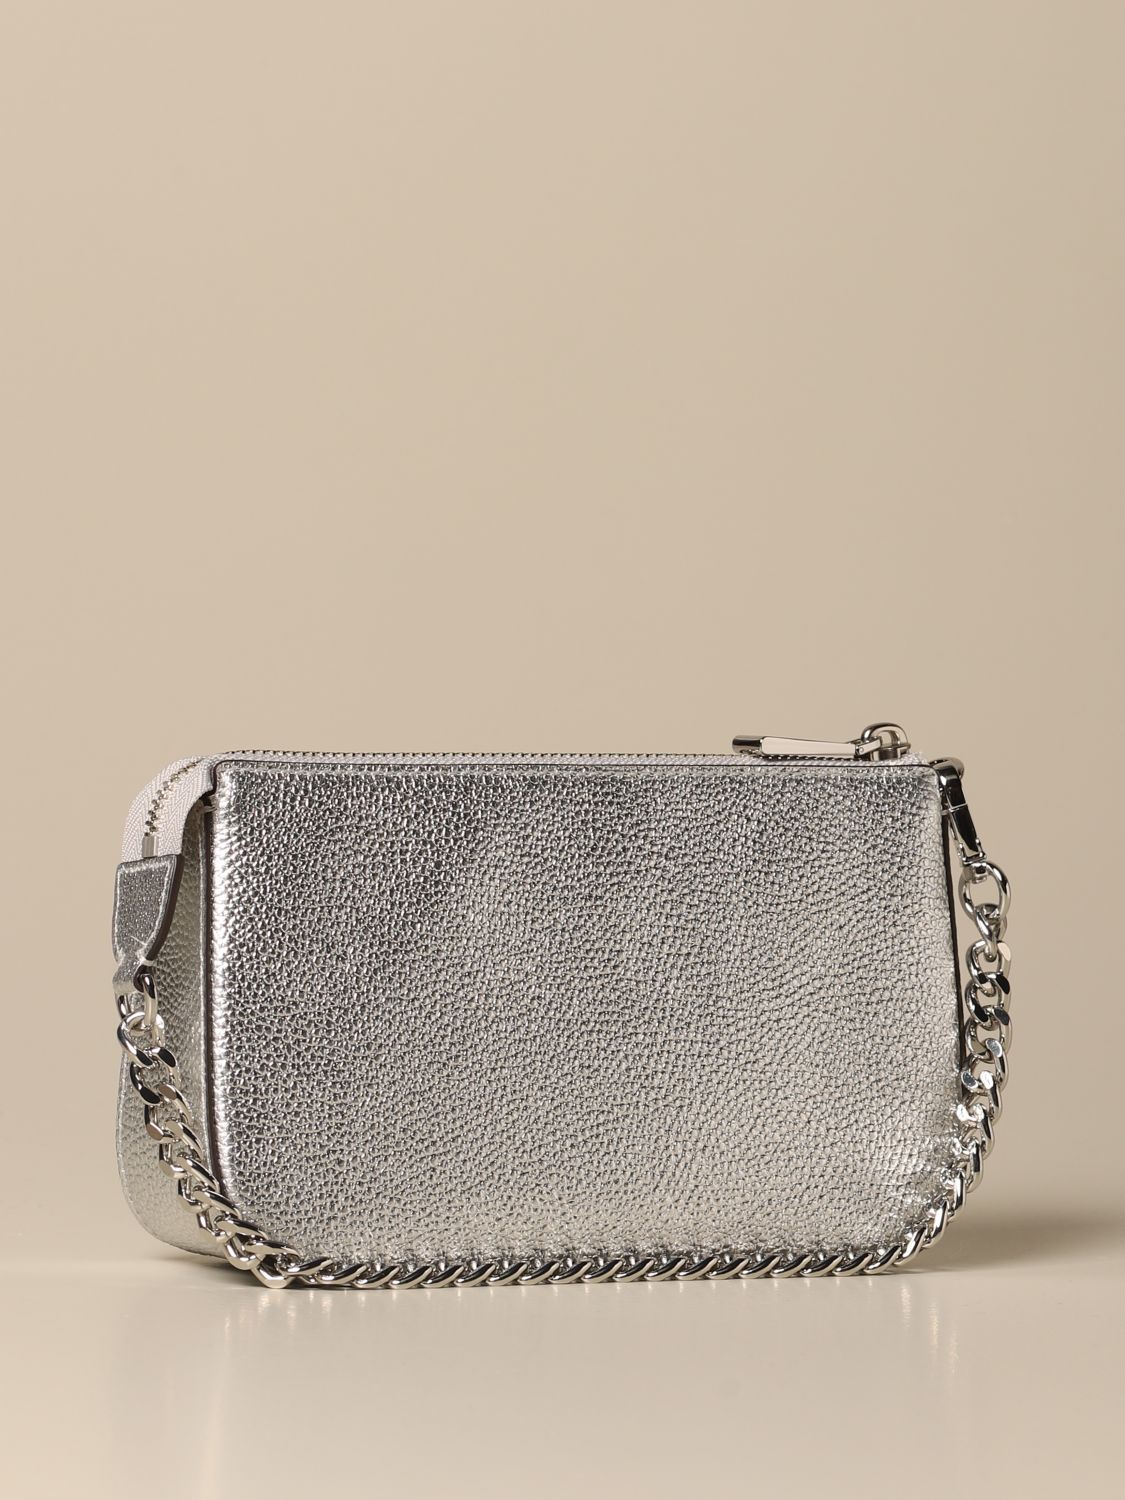 MICHAEL KORS: Michael chain clutch in laminated leather - Silver ...